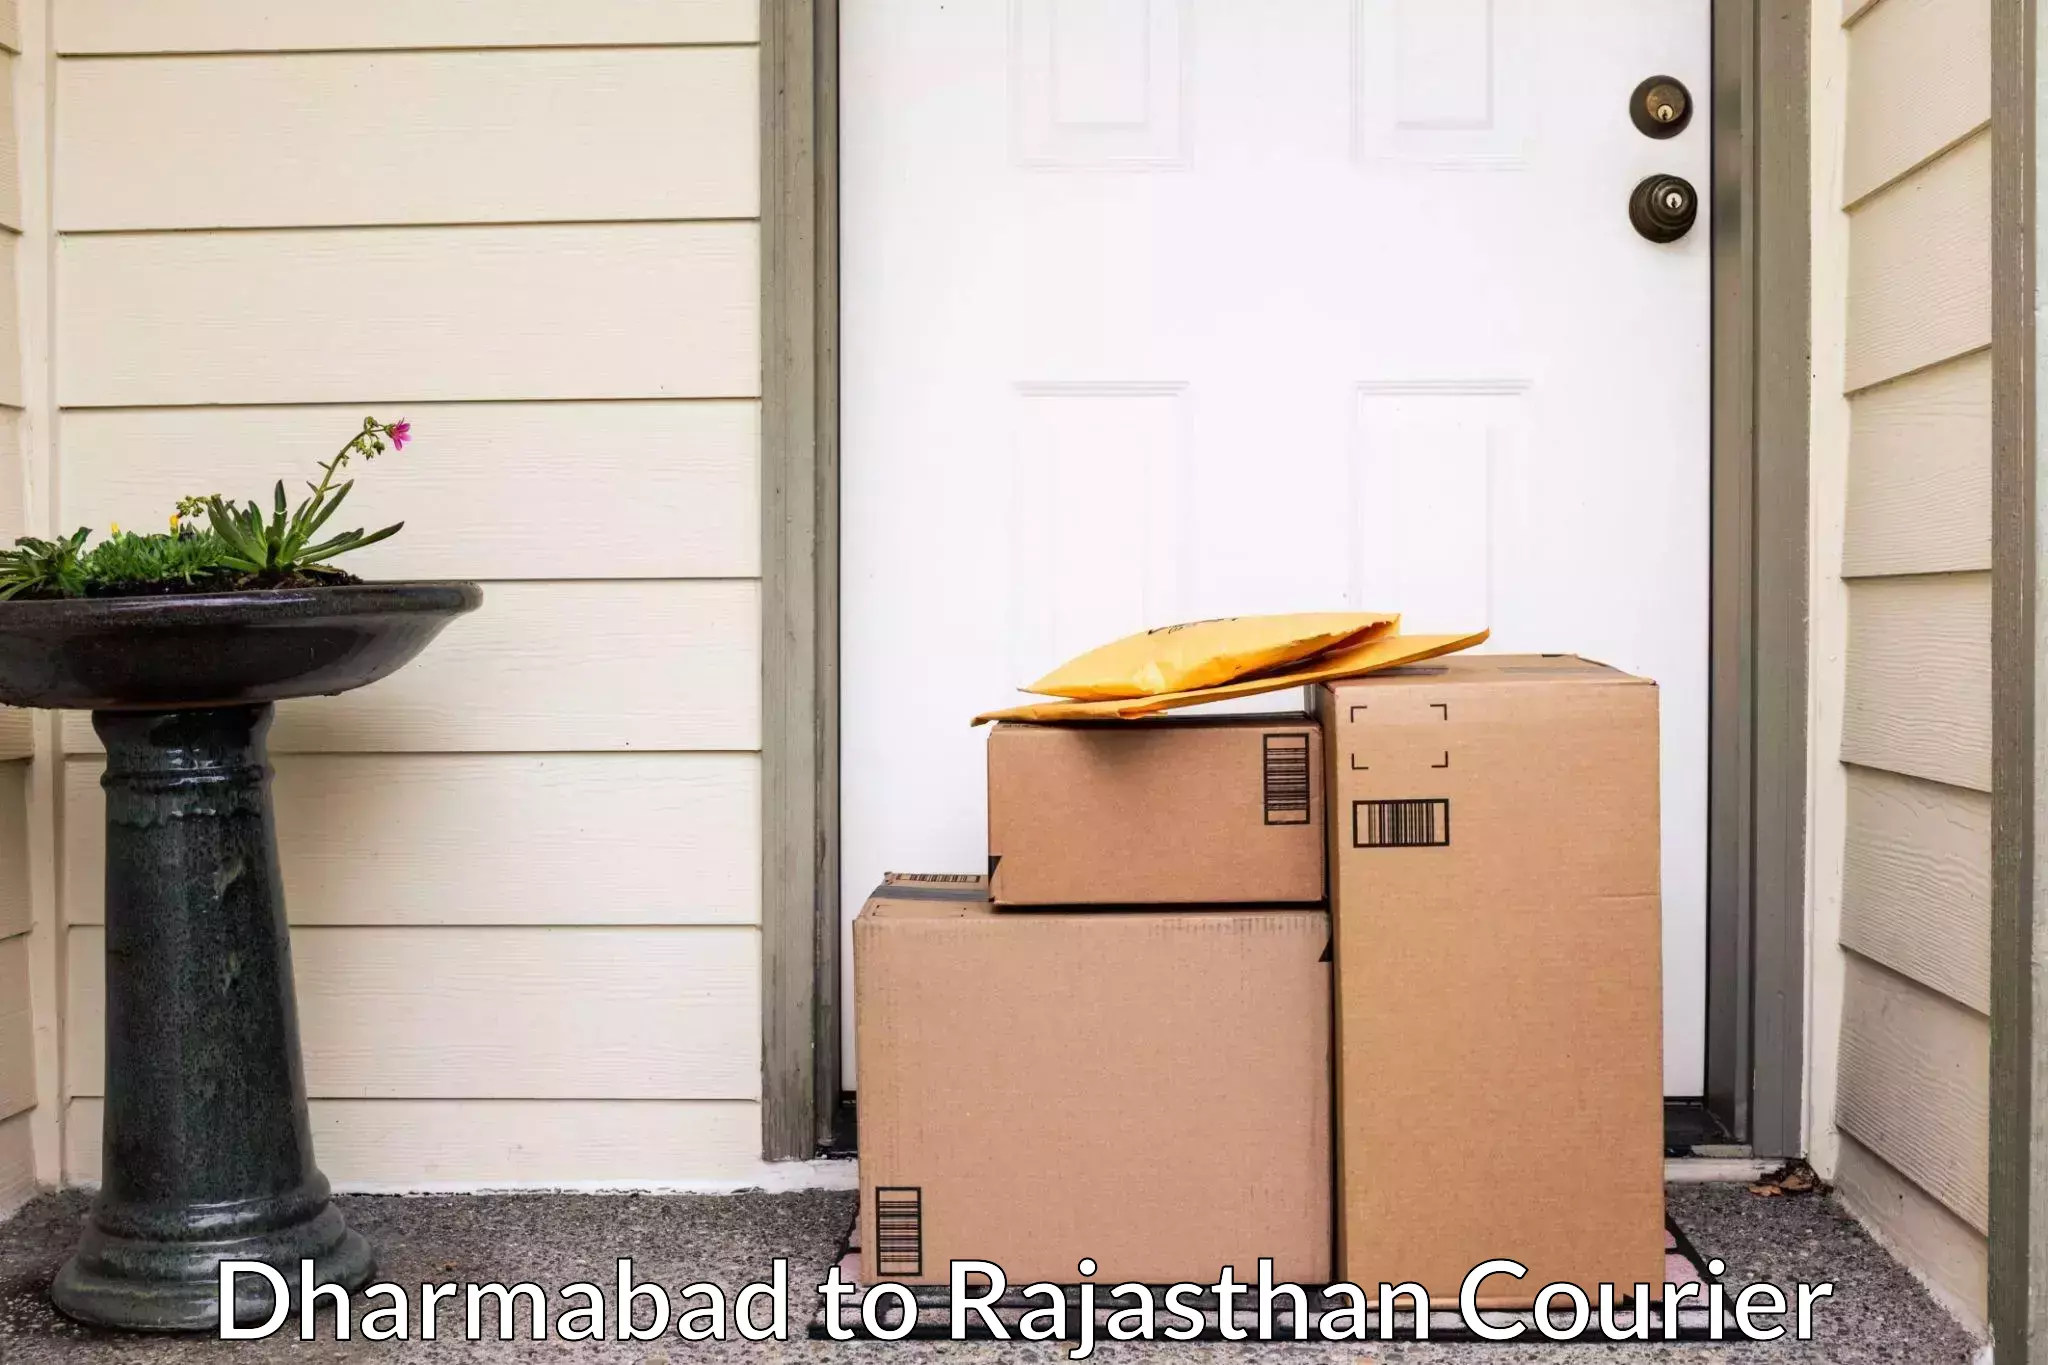 Quality relocation services Dharmabad to Kota